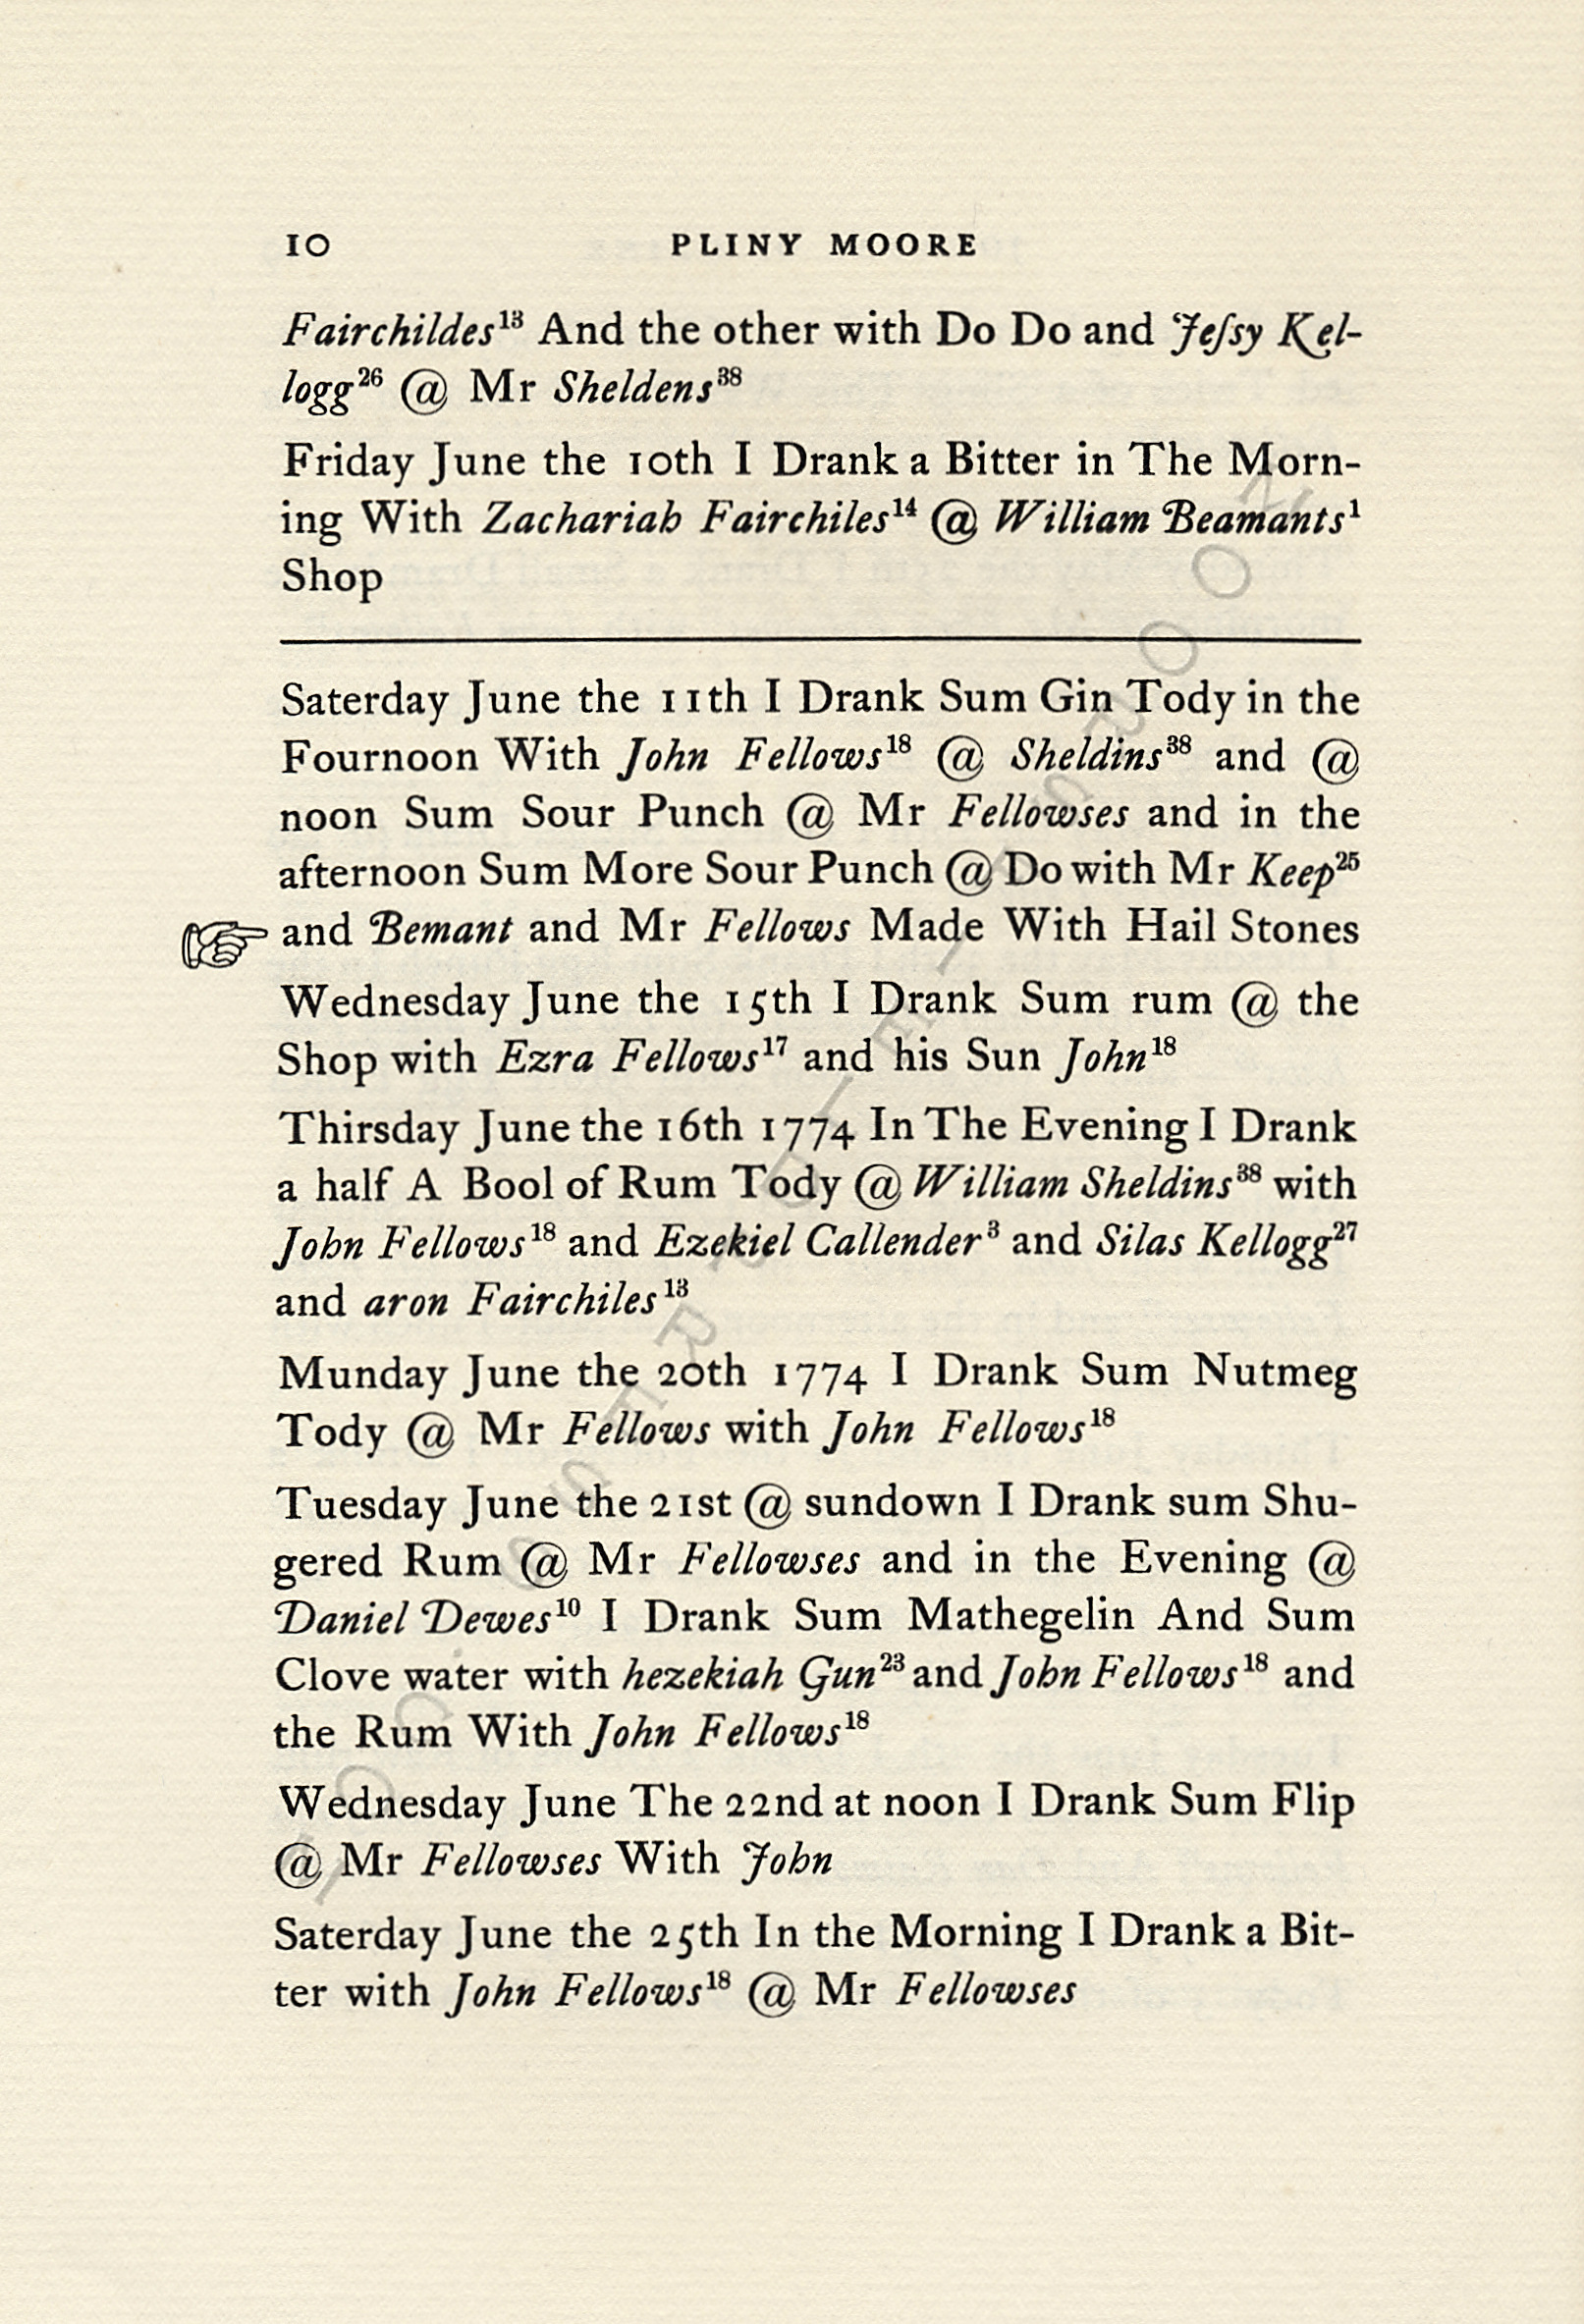 PLINY
                      MOORE PAPERS-JOURNAL OF DRINK 1774